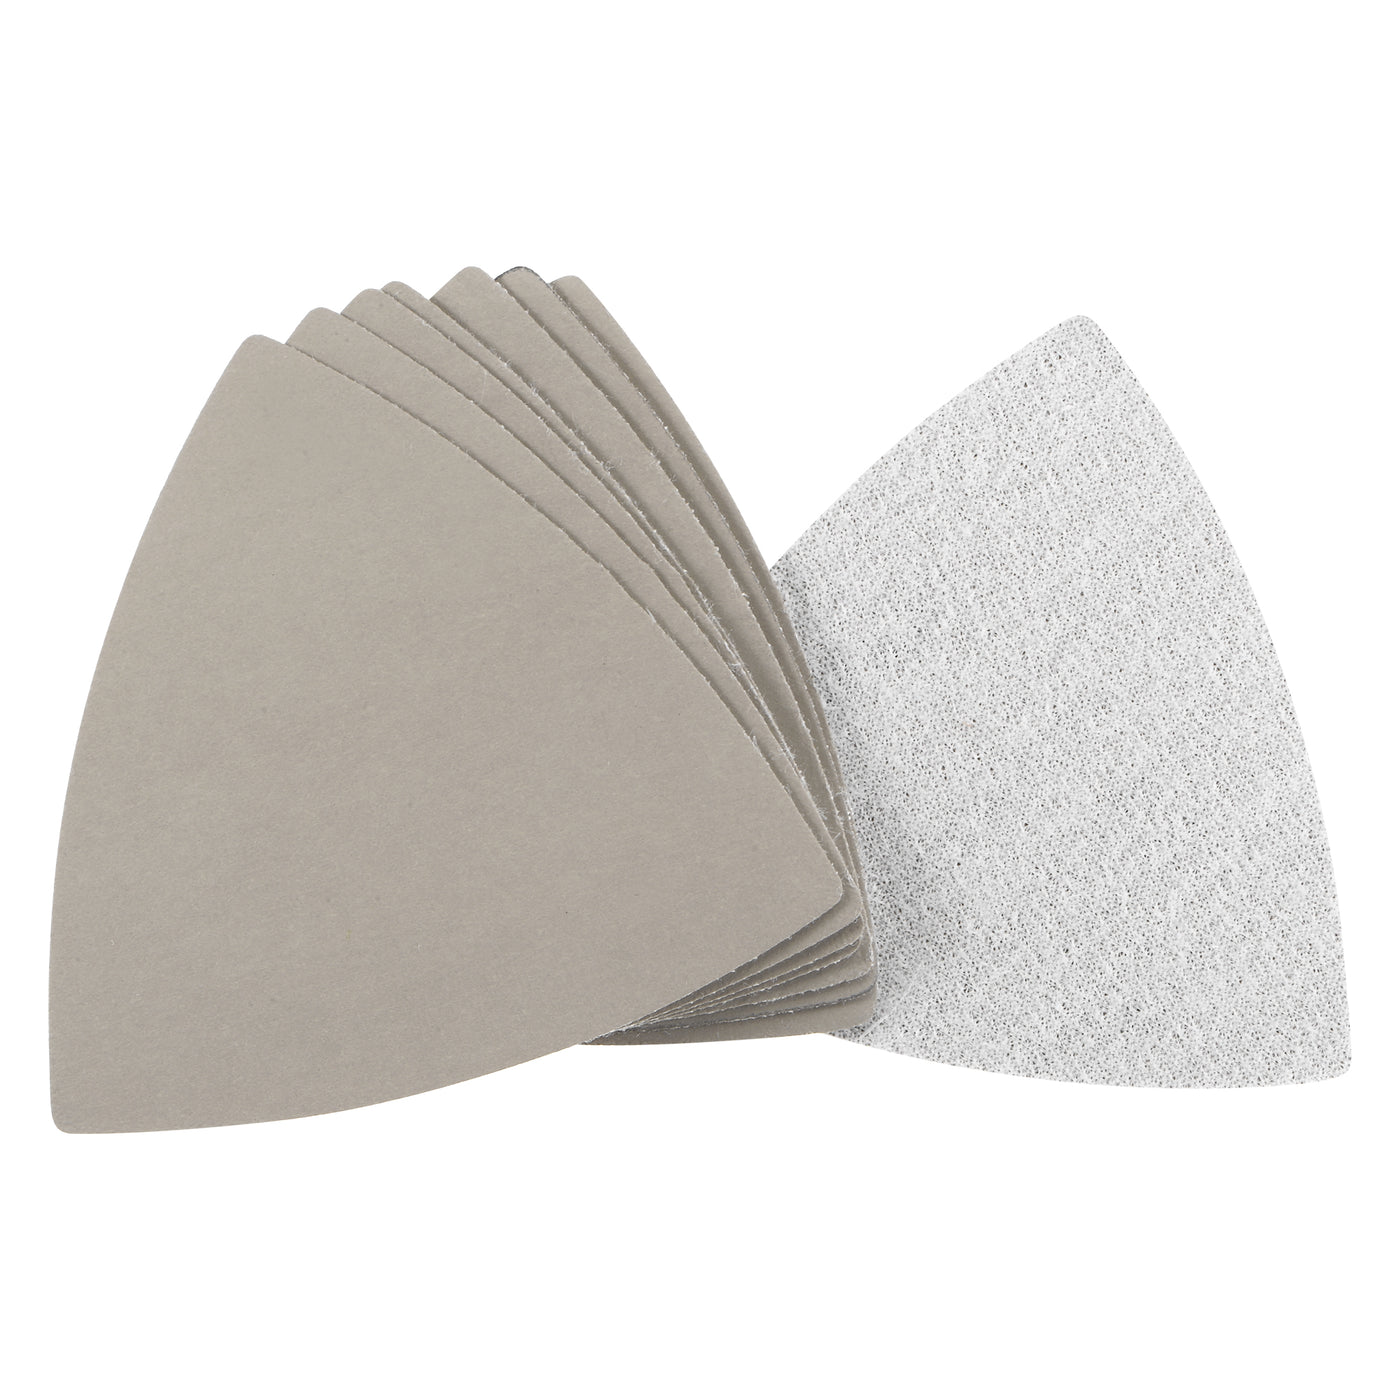 Uxcell Uxcell Triangle Sandpaper Hook and Loop 3-1/2" Oscillating Tool Wet/Dry 7000 Grit 10pcs